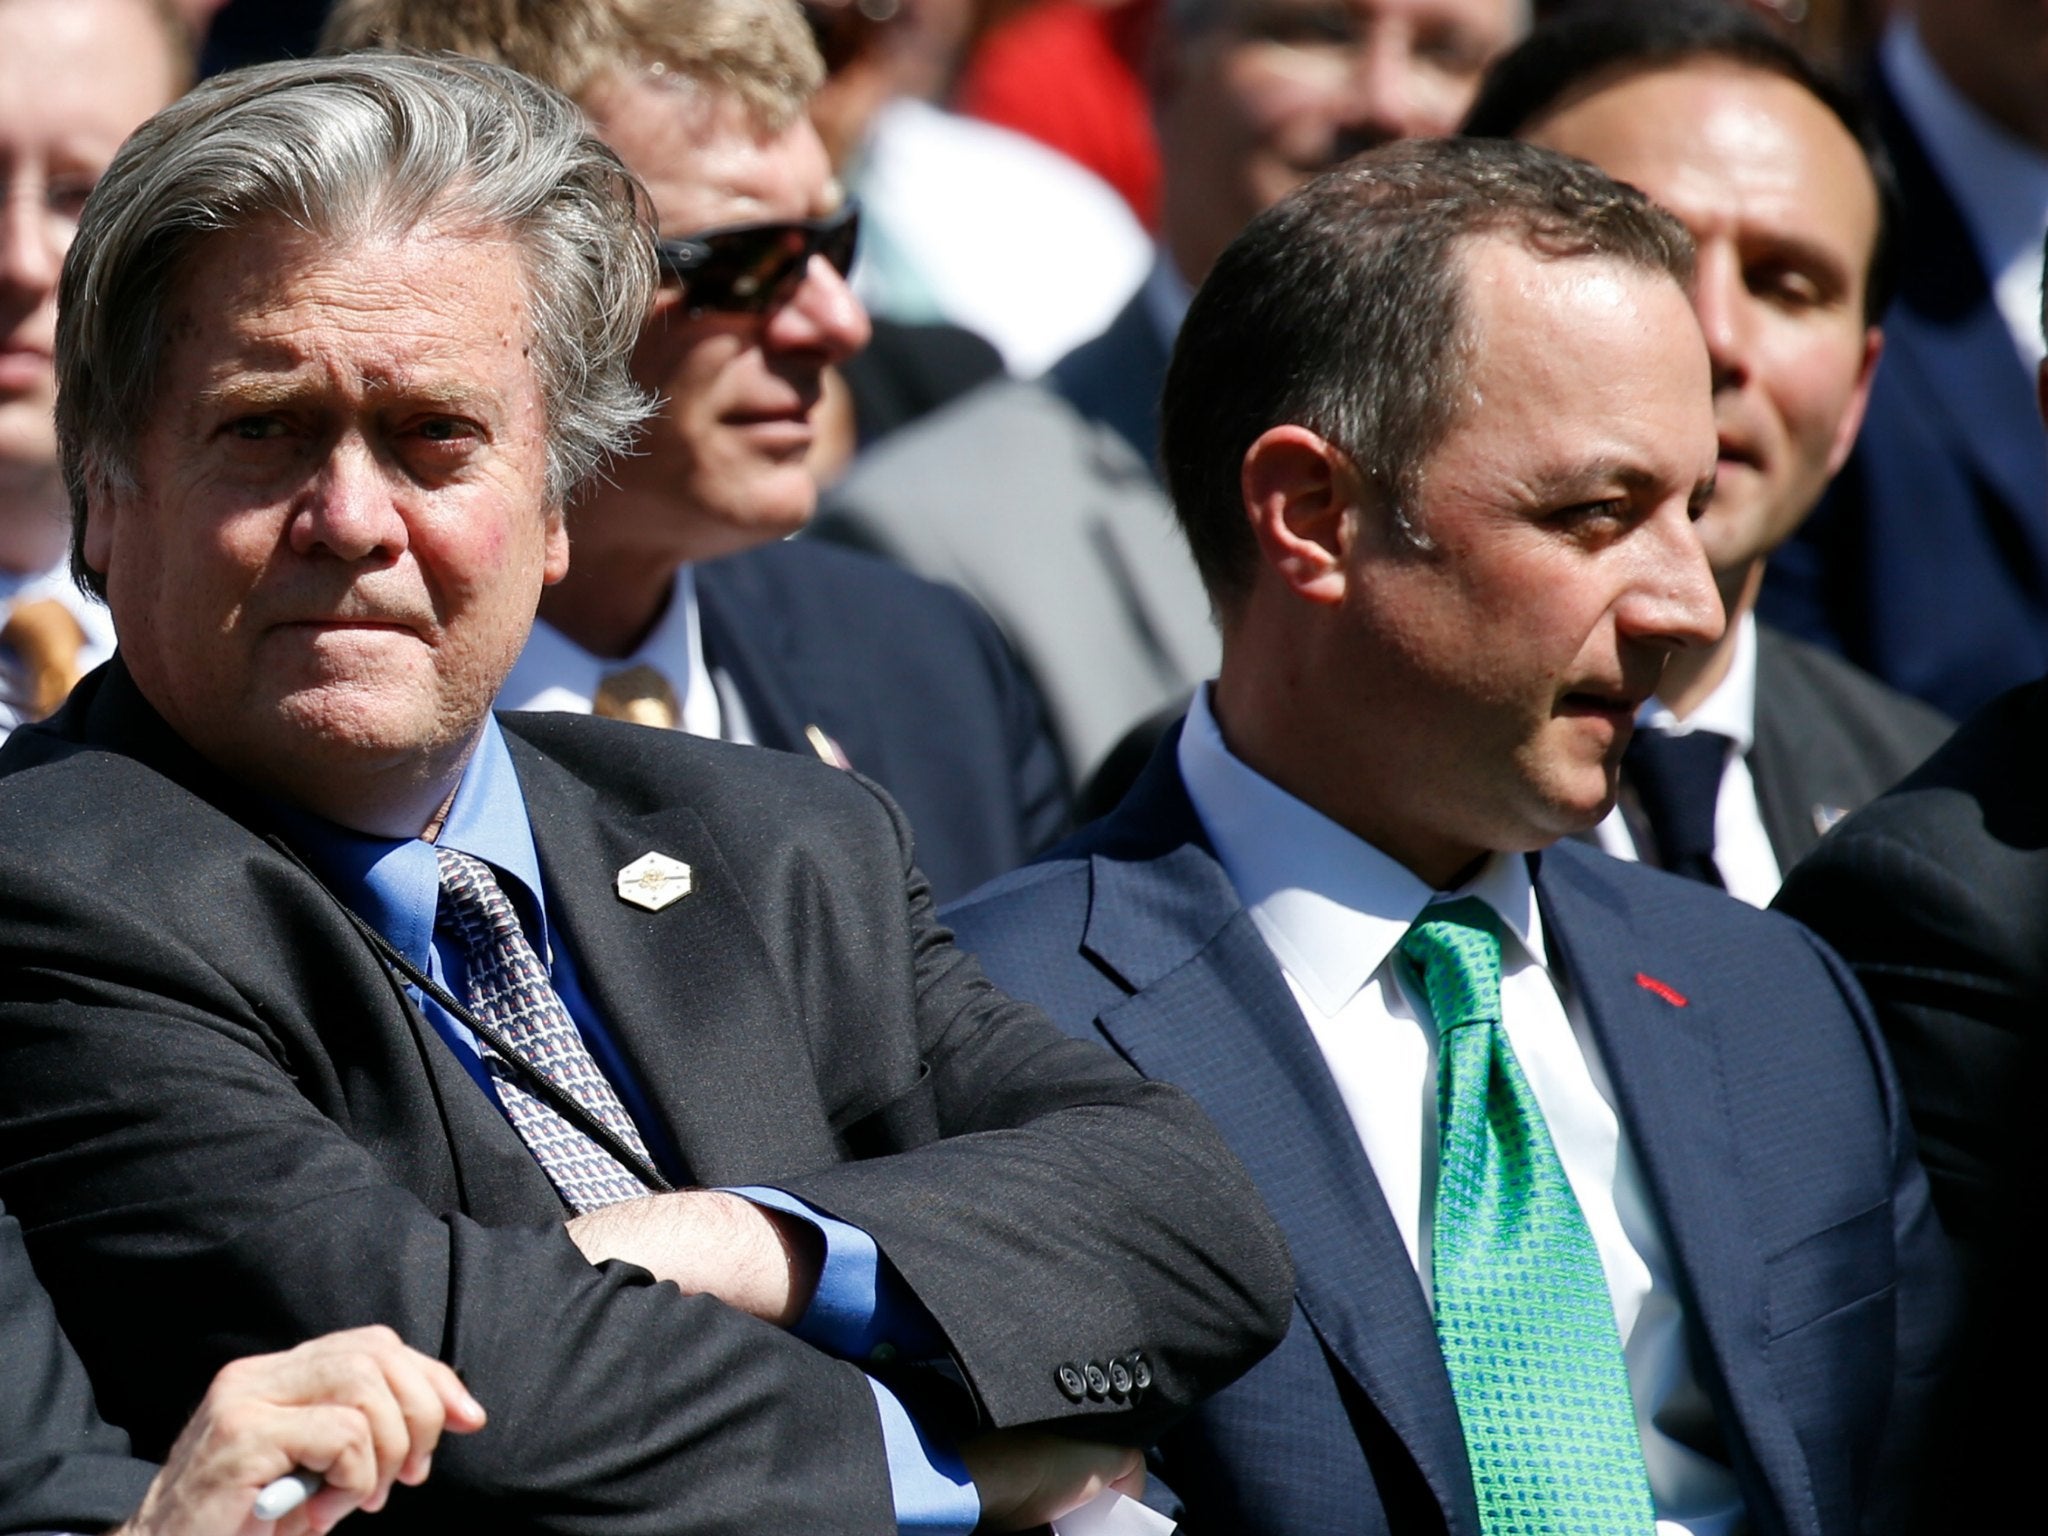 Then-White House Chief Strategist Stephen Bannon and then-Chief of Staff Reince Priebus (R) in Washington on June 1, 2017. Two months later, both have lost those jobs.